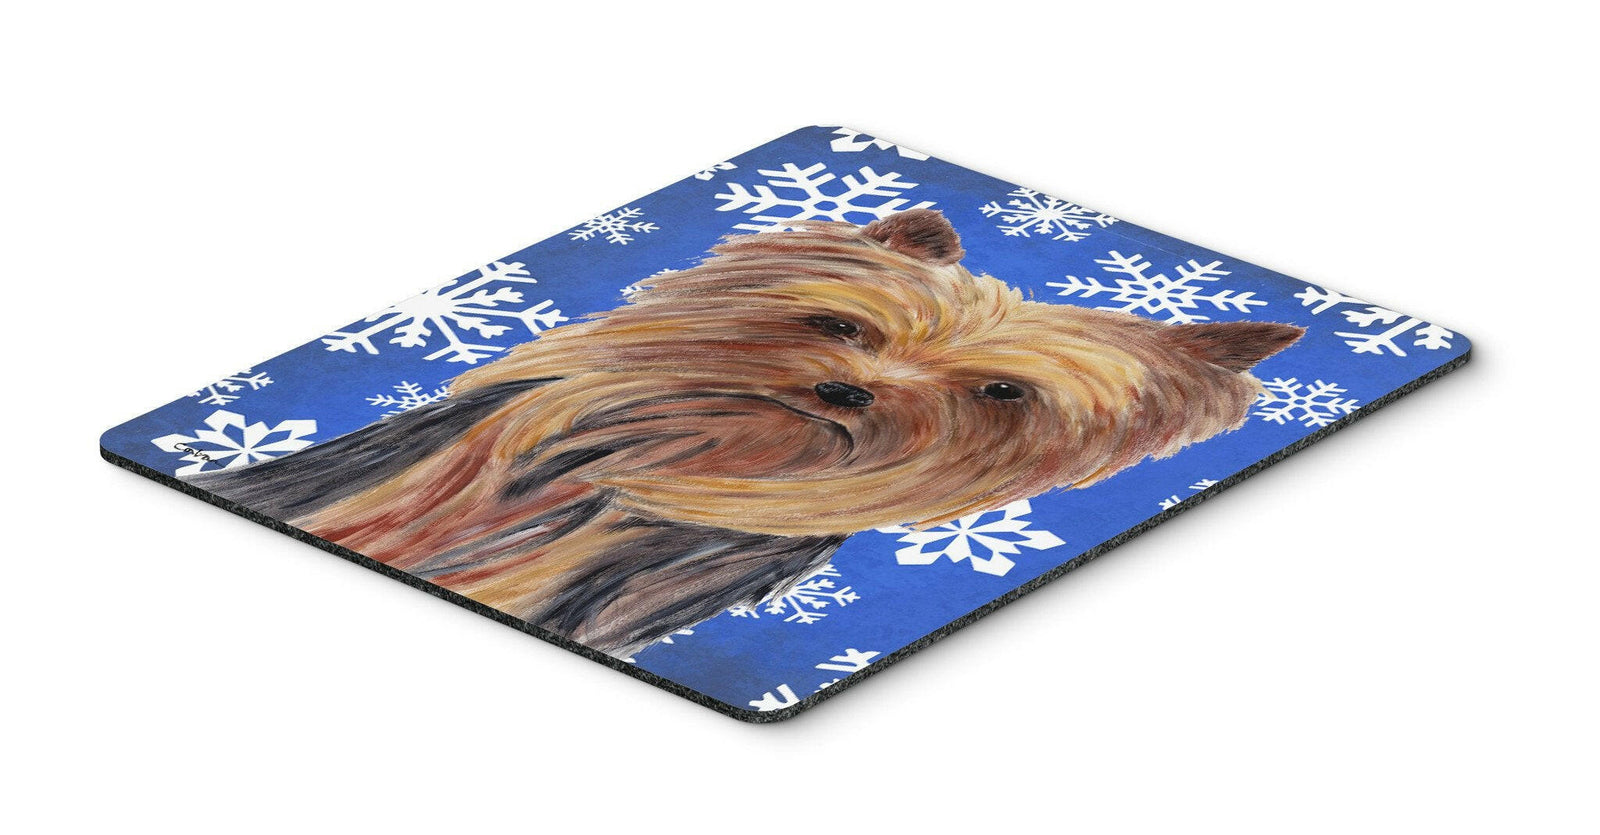 Yorkie Winter Snowflakes Holiday Mouse Pad, Hot Pad or Trivet by Caroline's Treasures